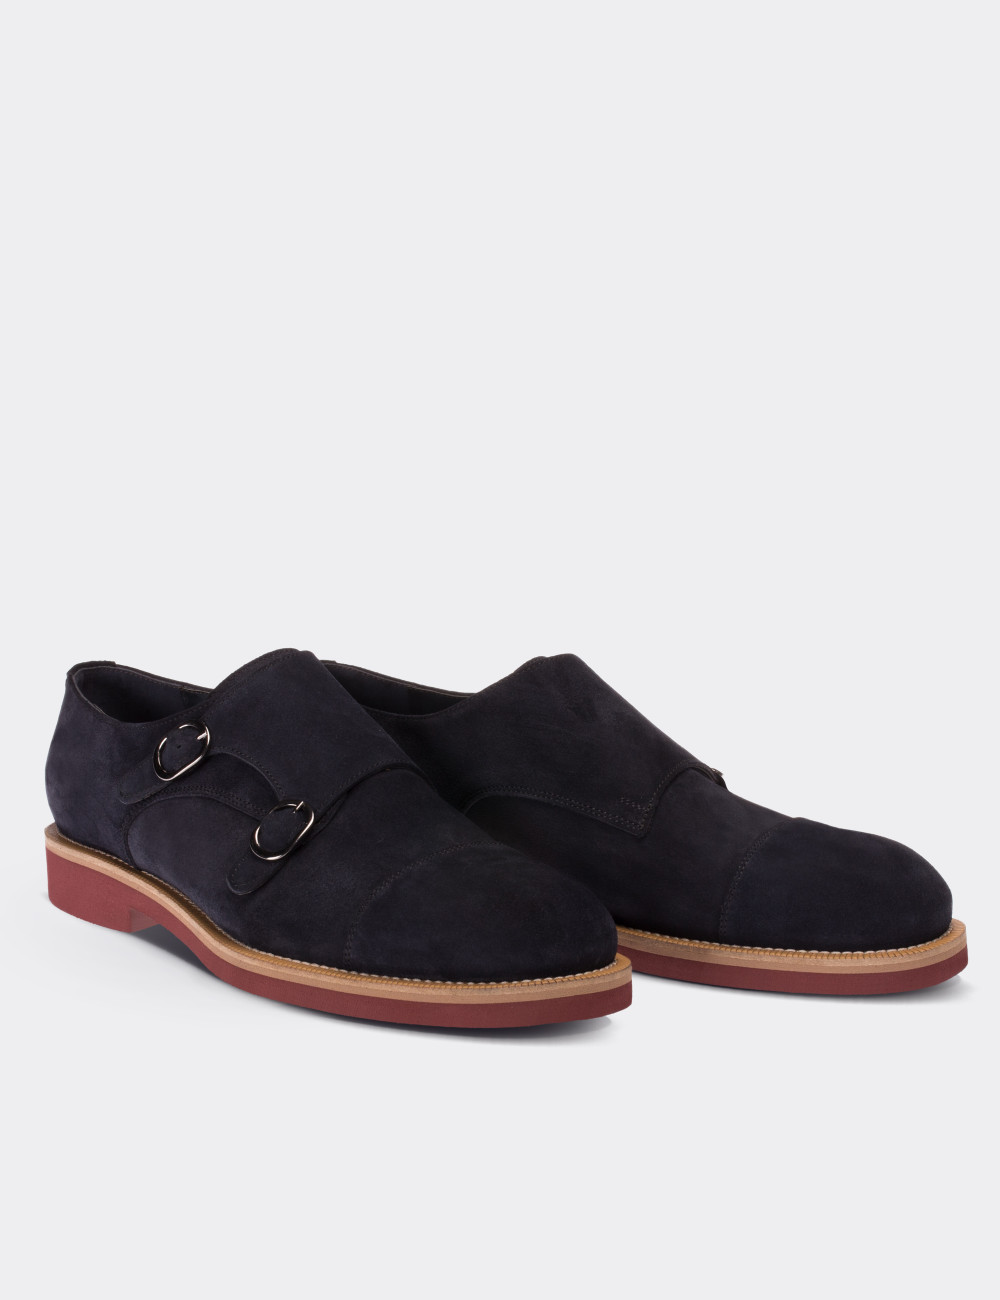 Navy Suede Leather Monk Straps Shoes - 01566MLCVE01